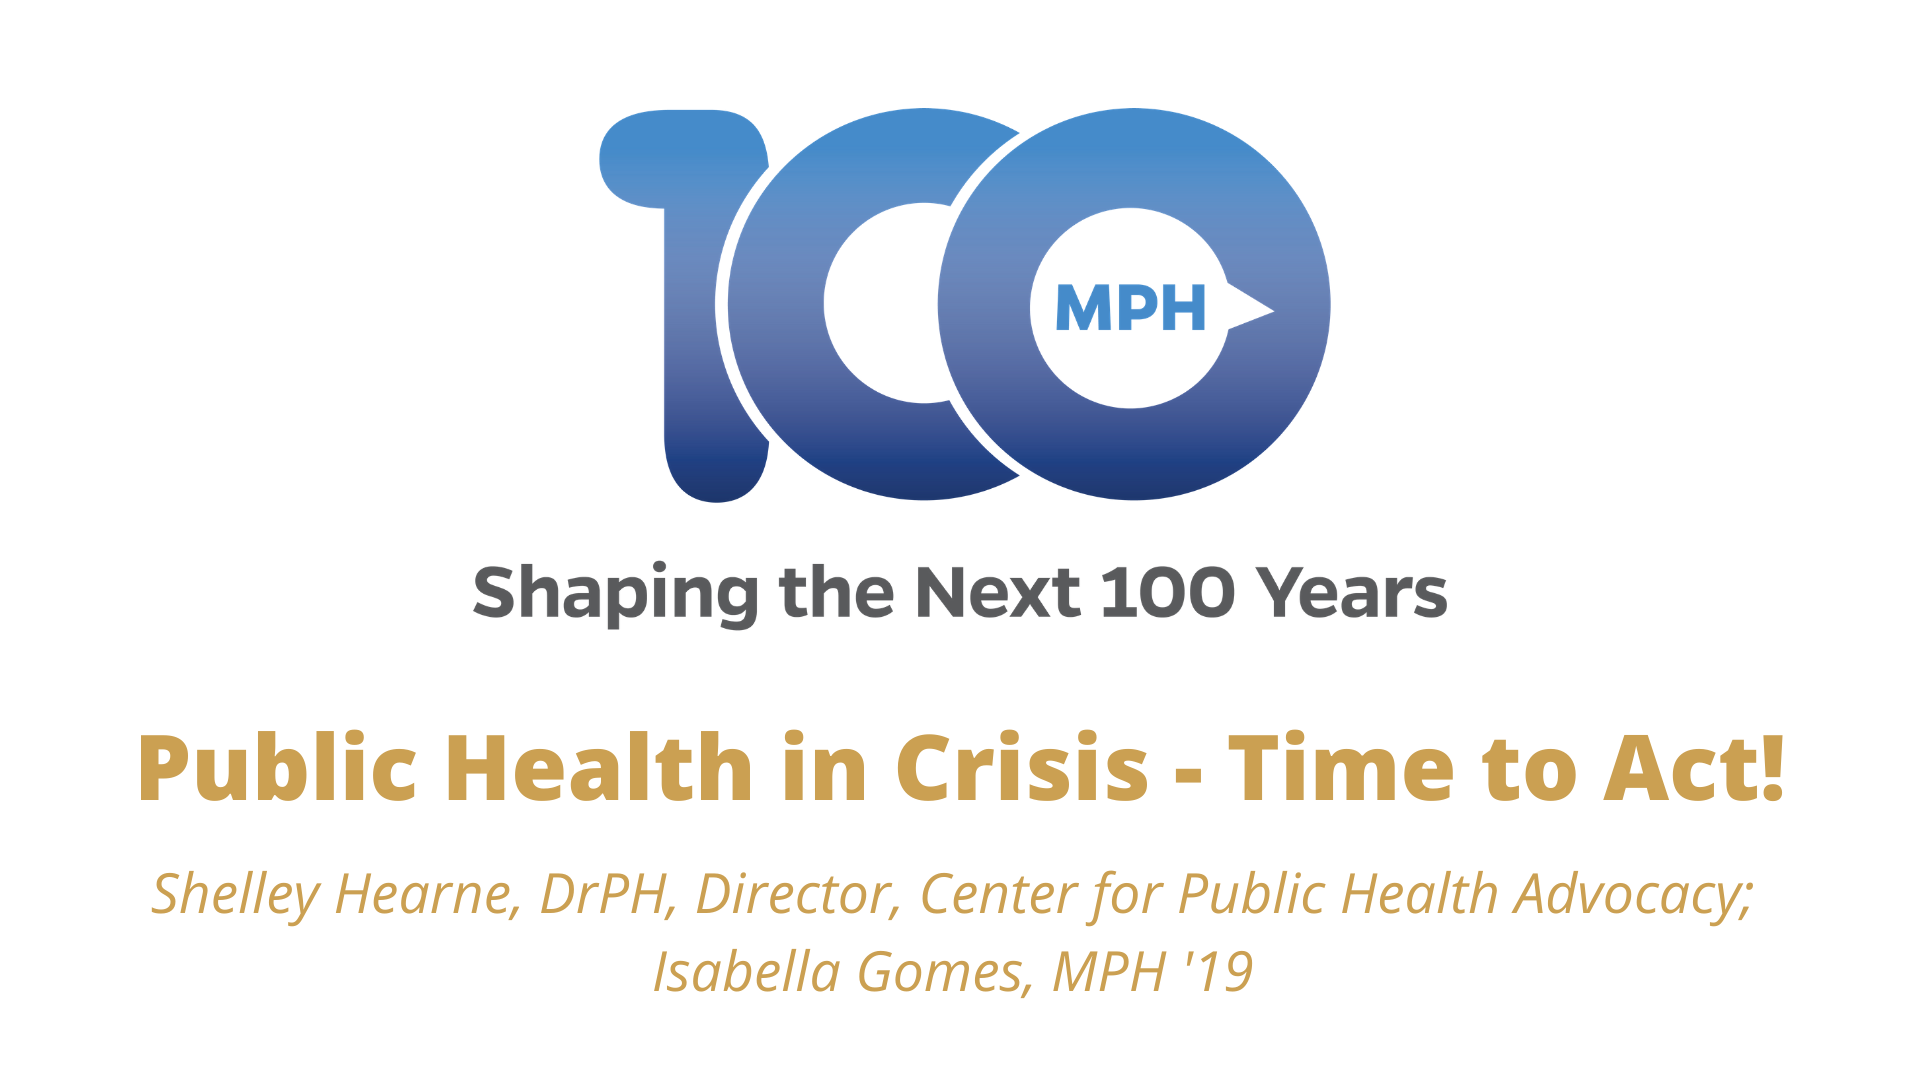 Public Health in Crisis - Time to Act